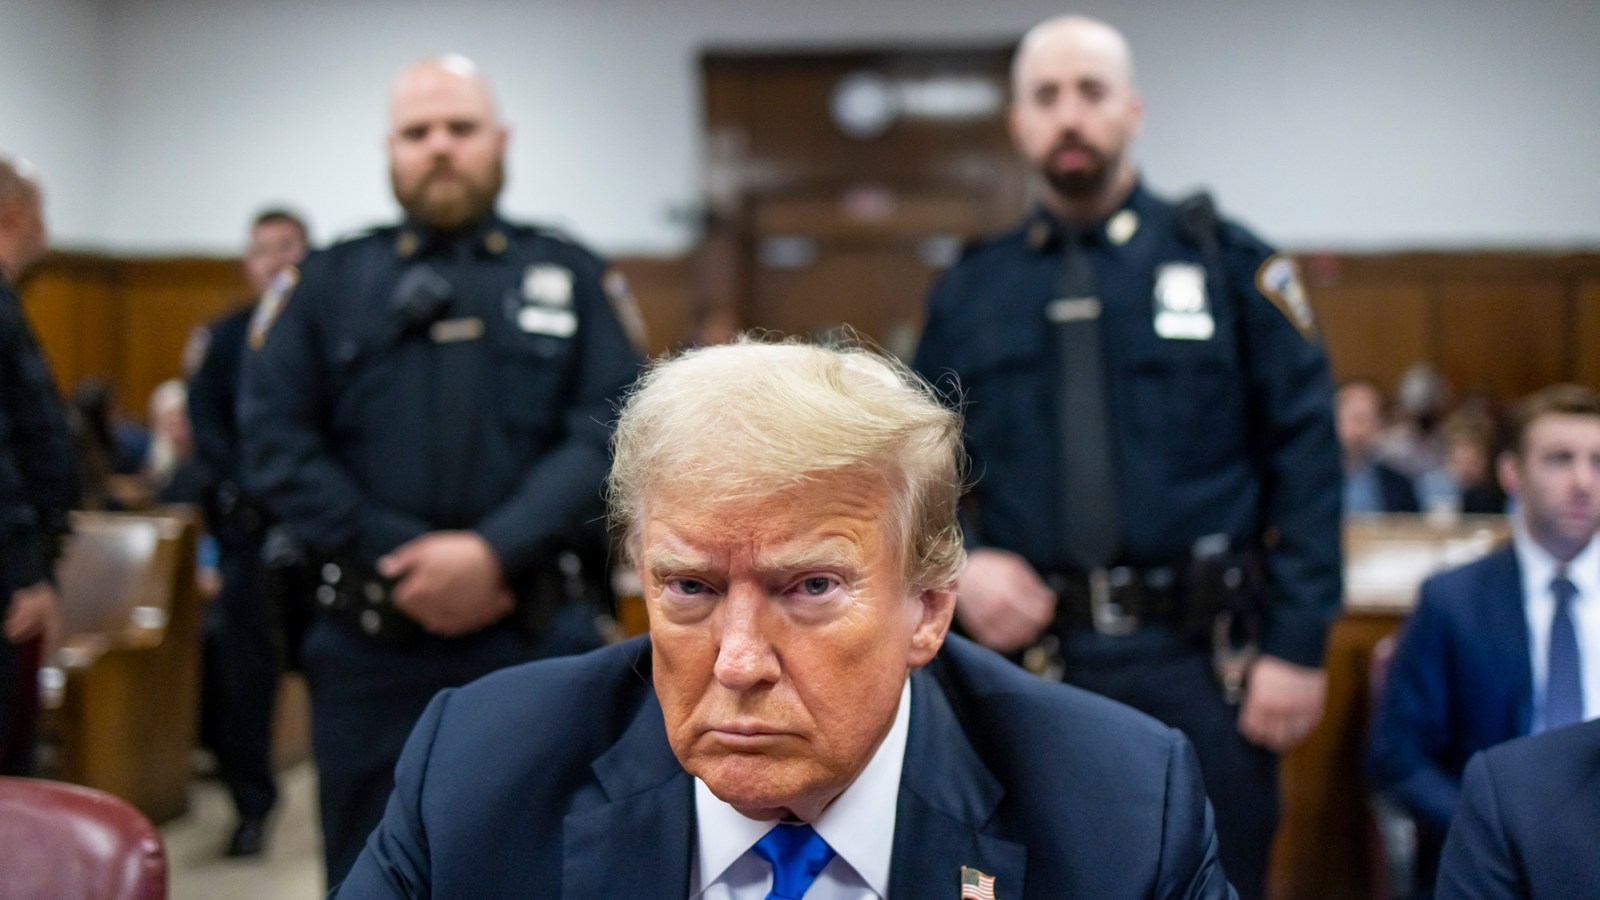 The Legal Case for Sentencing Trump to Prison